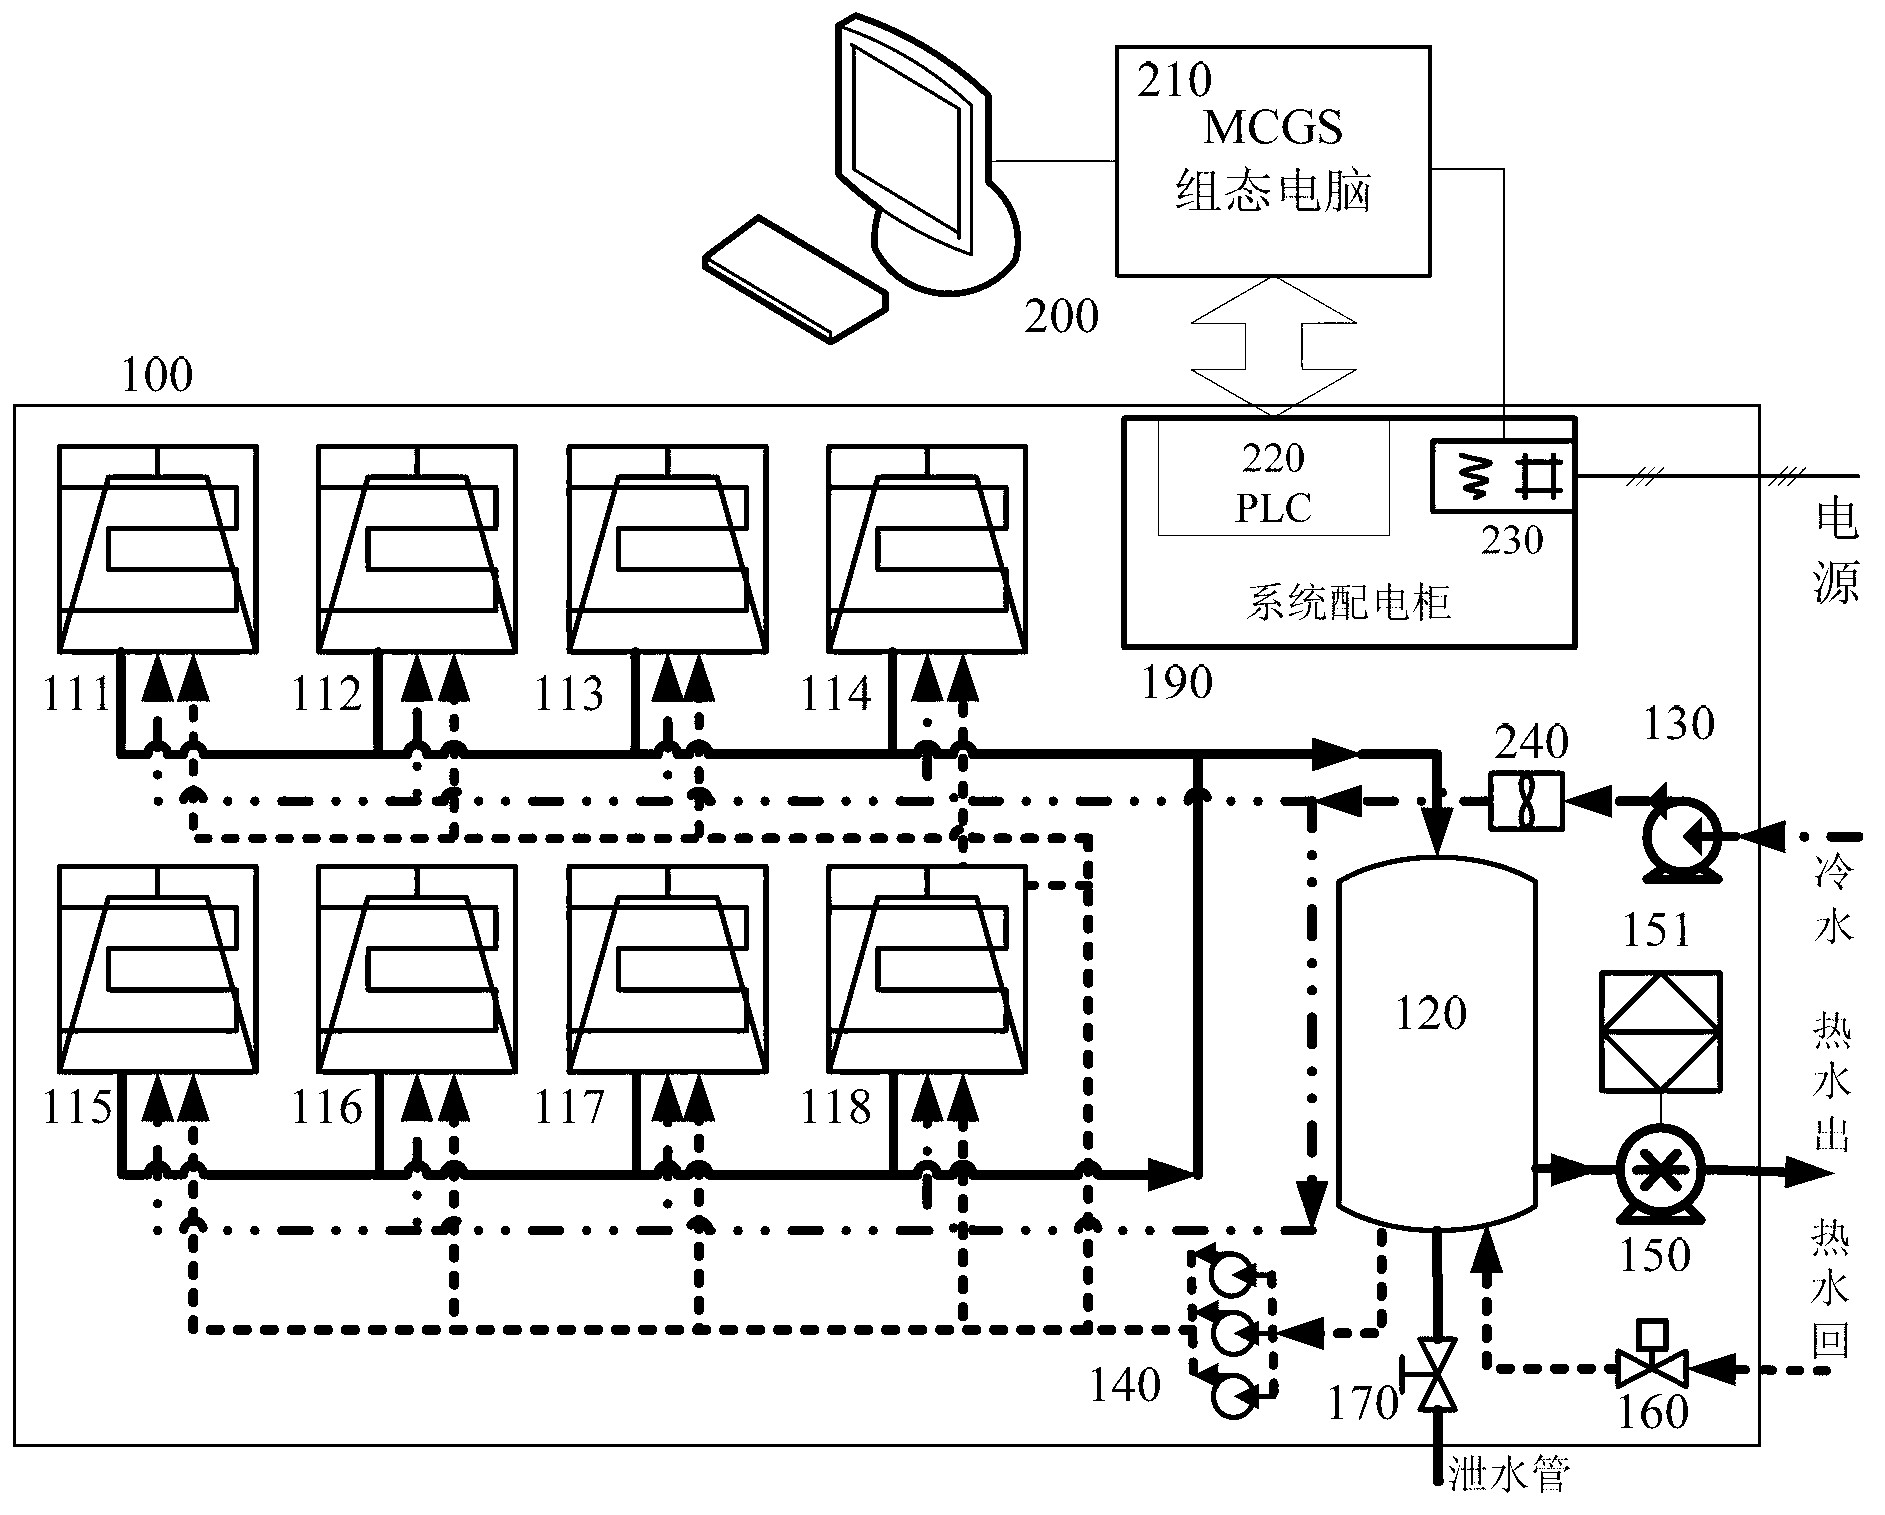 Programmable logic controller (PLC) based monitor and control generated system (MCGS) heat pump monitoring system and control method thereof